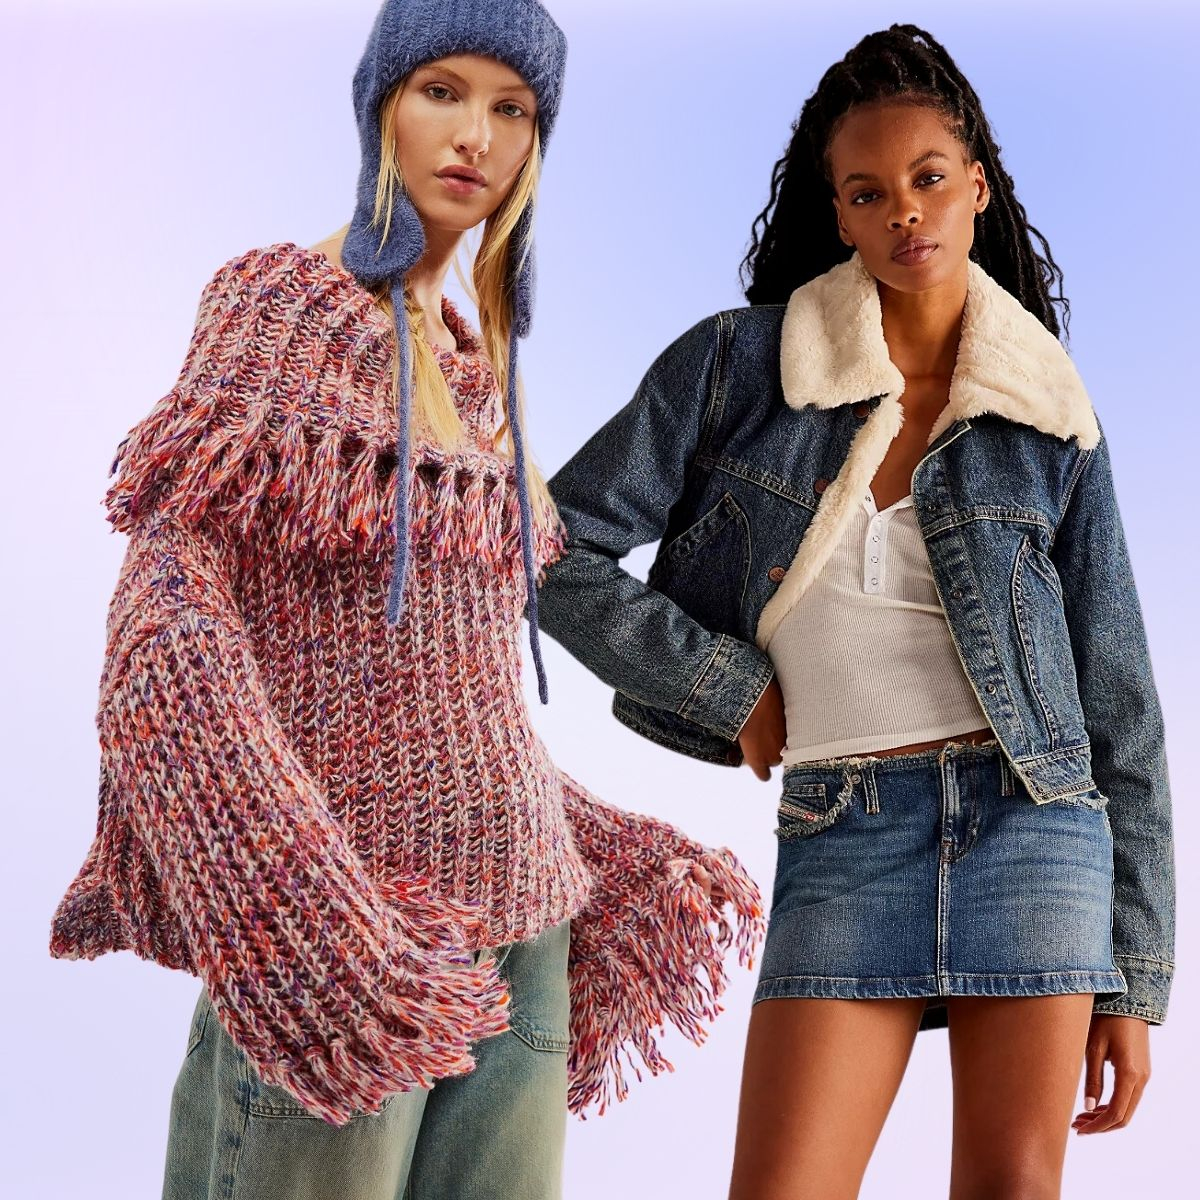 Shop Deals Starting at $24 During Free People’s After-Holiday Sale